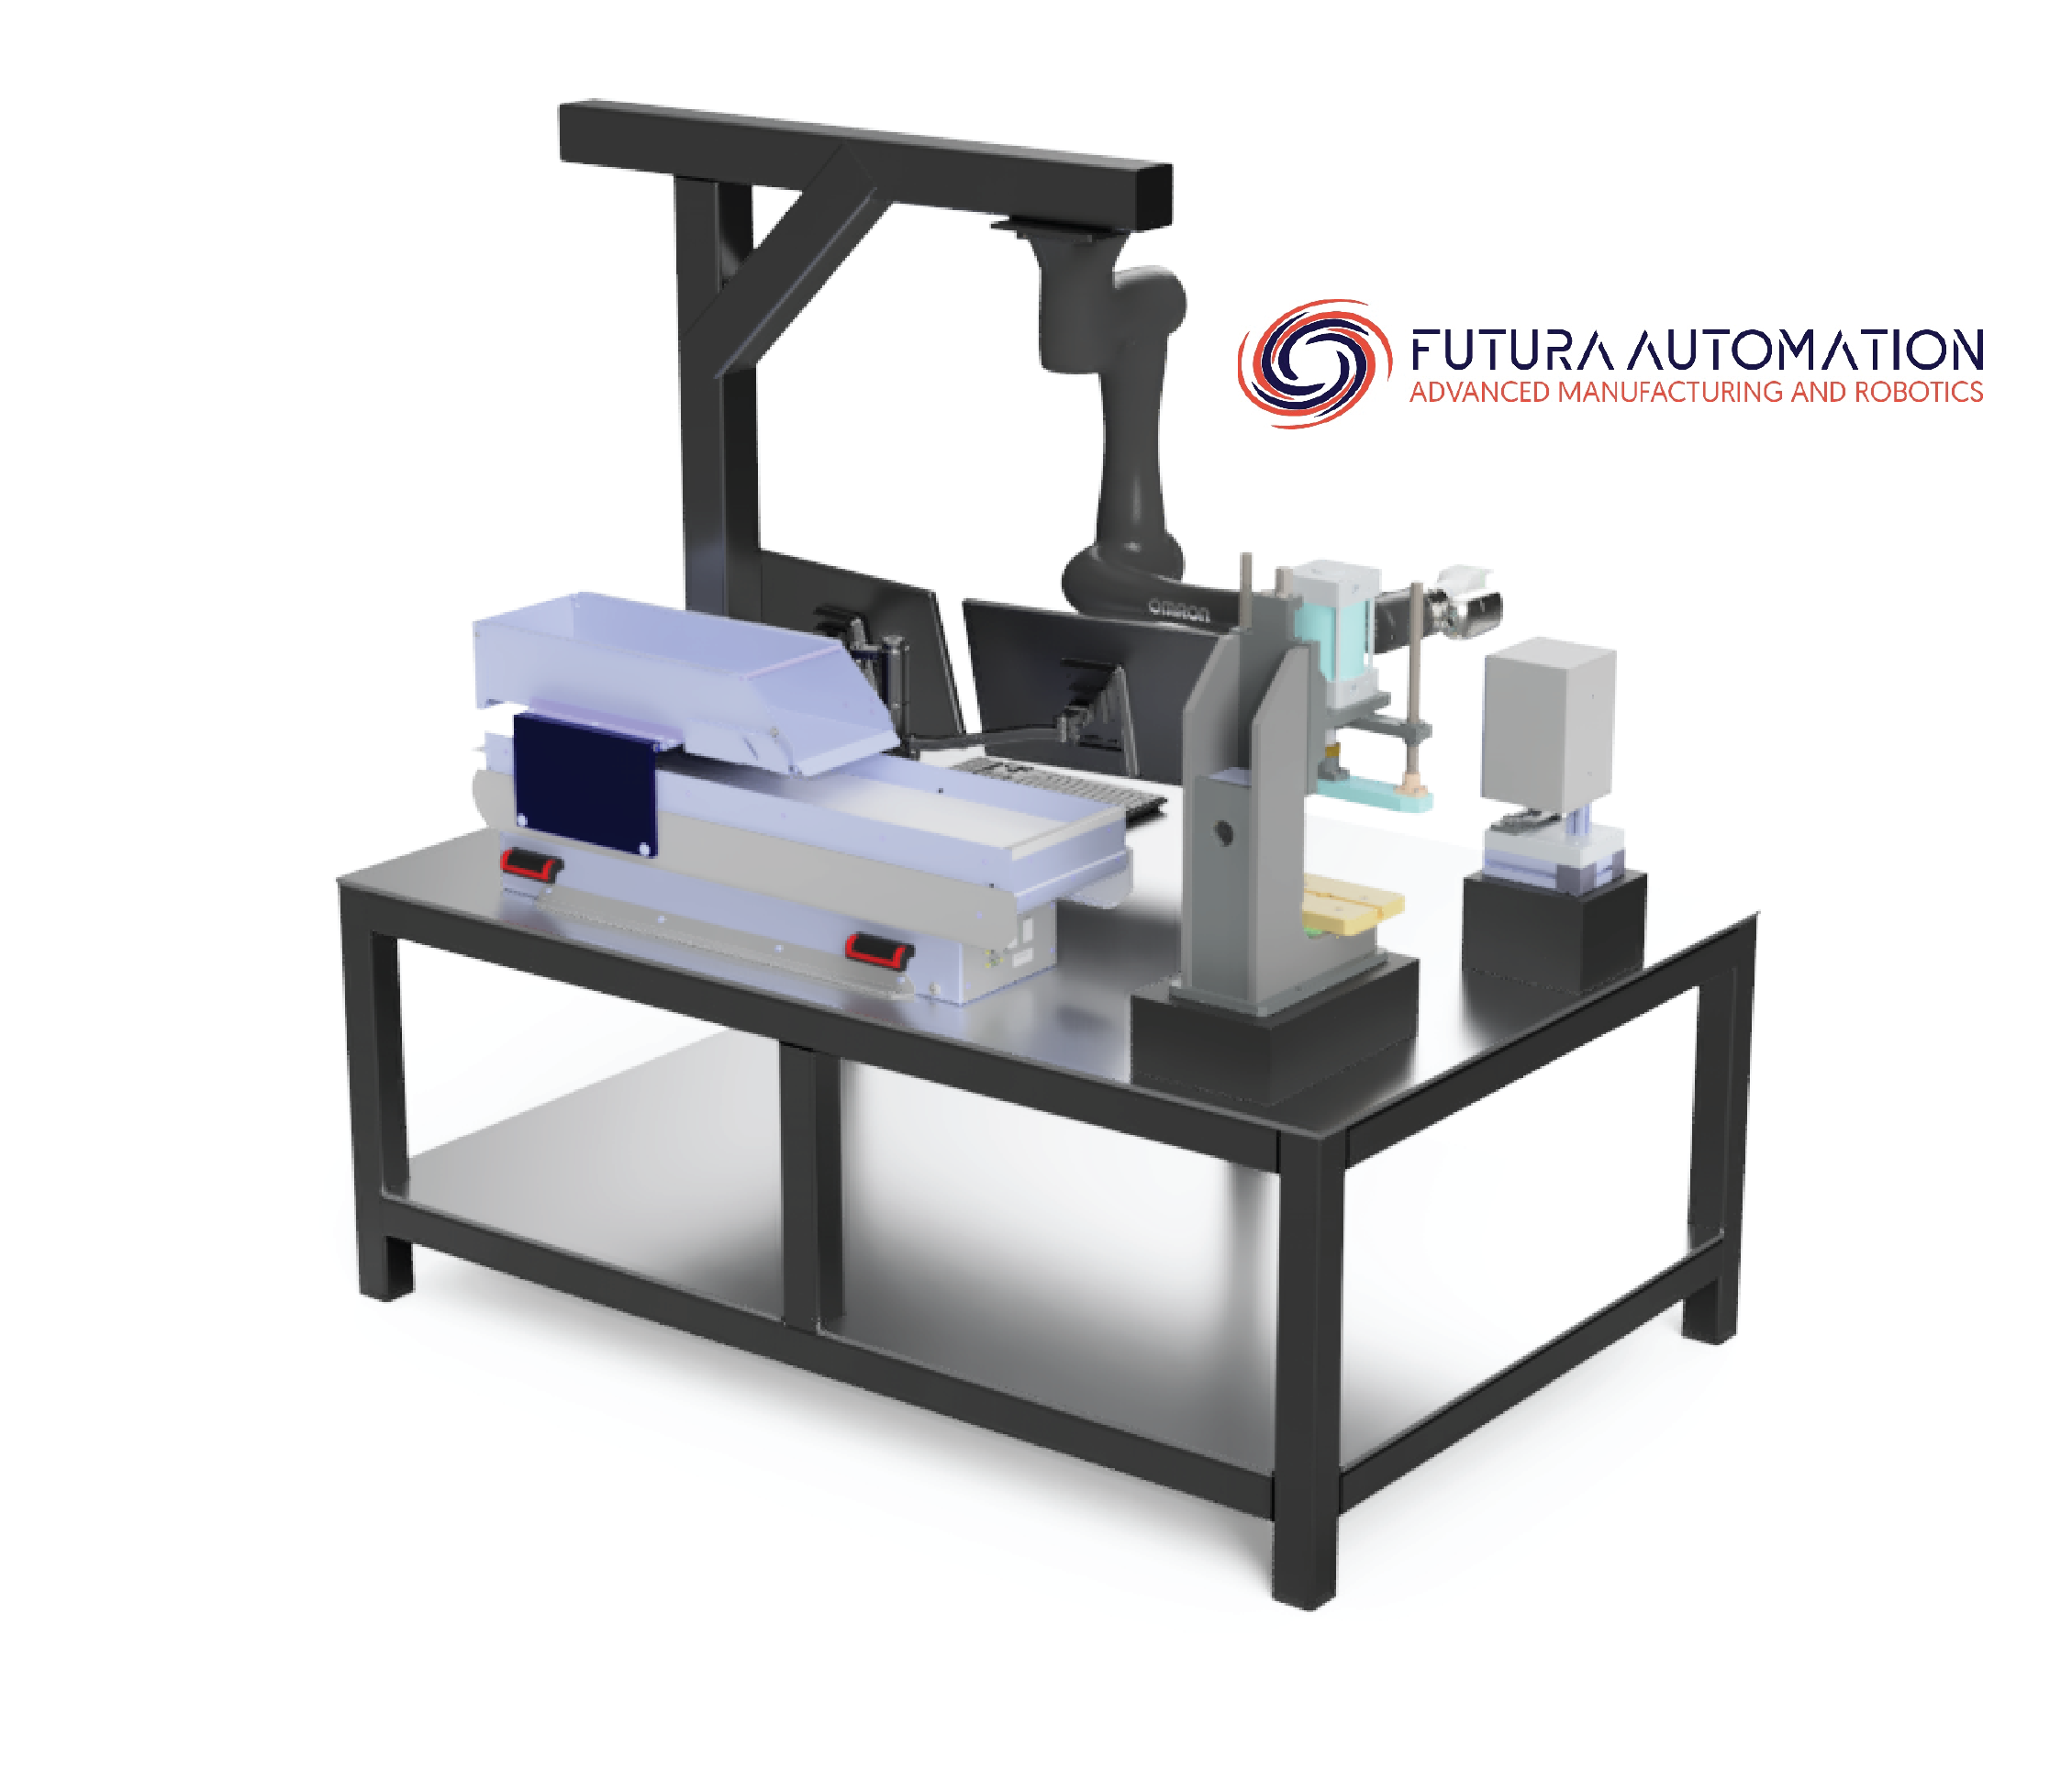 Futura Automation - Flexible Feed System Graphic